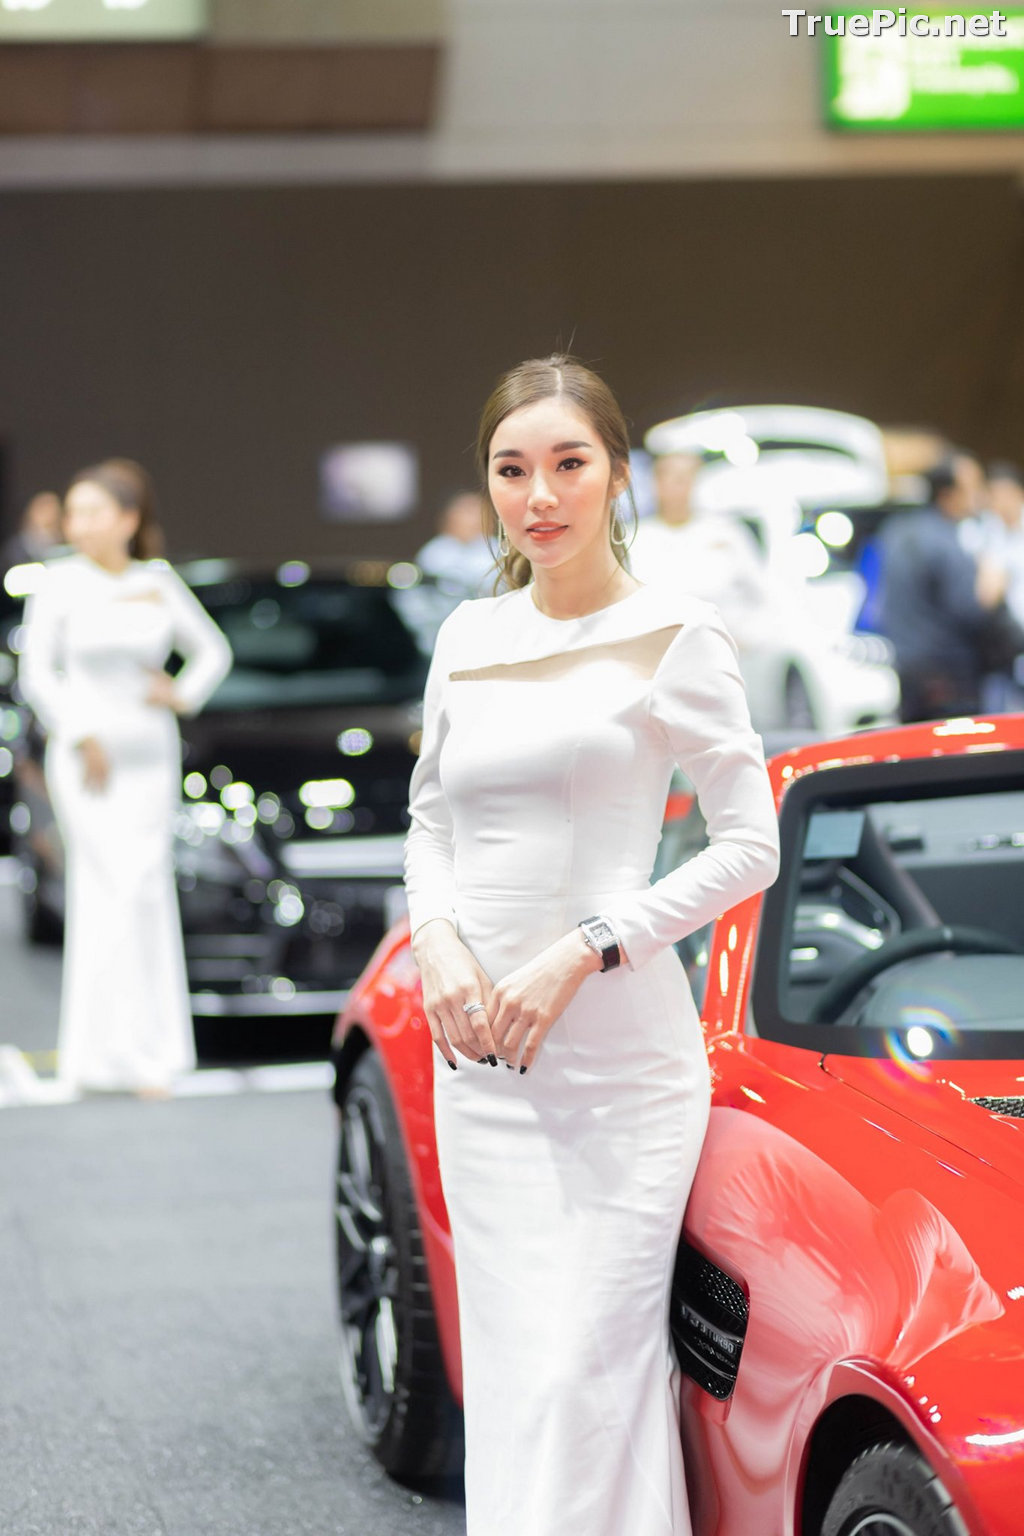 Image Thailand Racing Model at BIG Motor Sale 2019 - TruePic.net - Picture-15